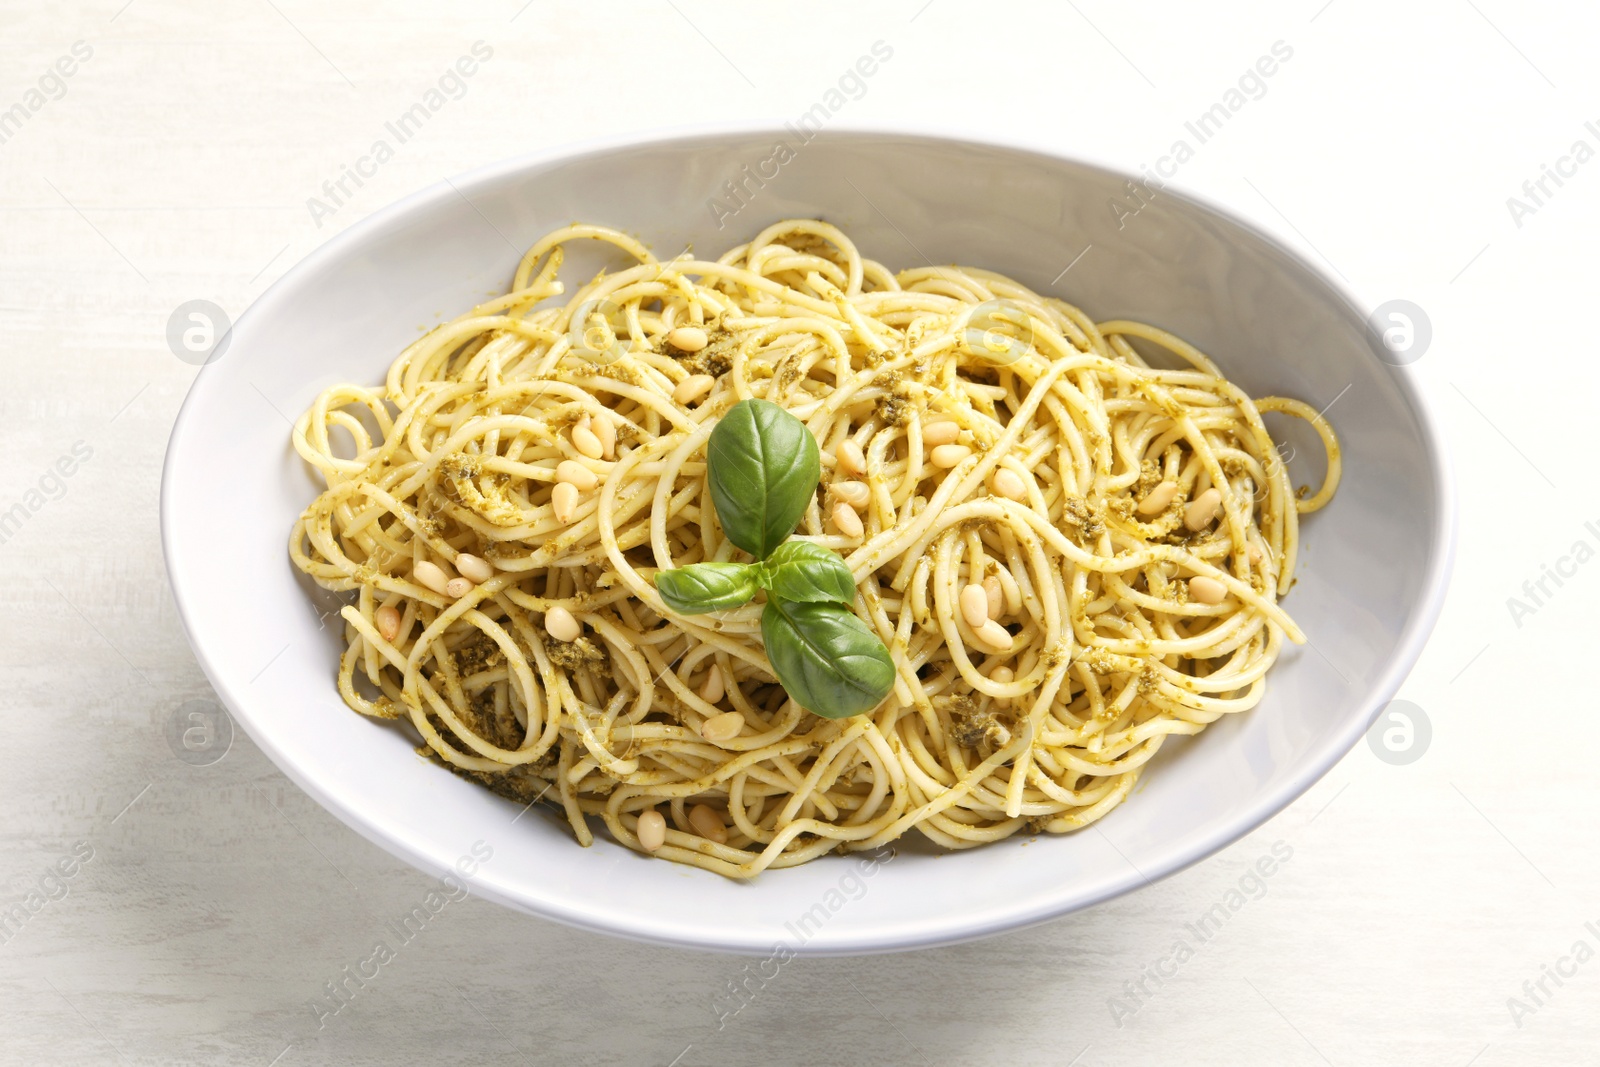 Photo of Plate of delicious basil pesto pasta on white background, top view